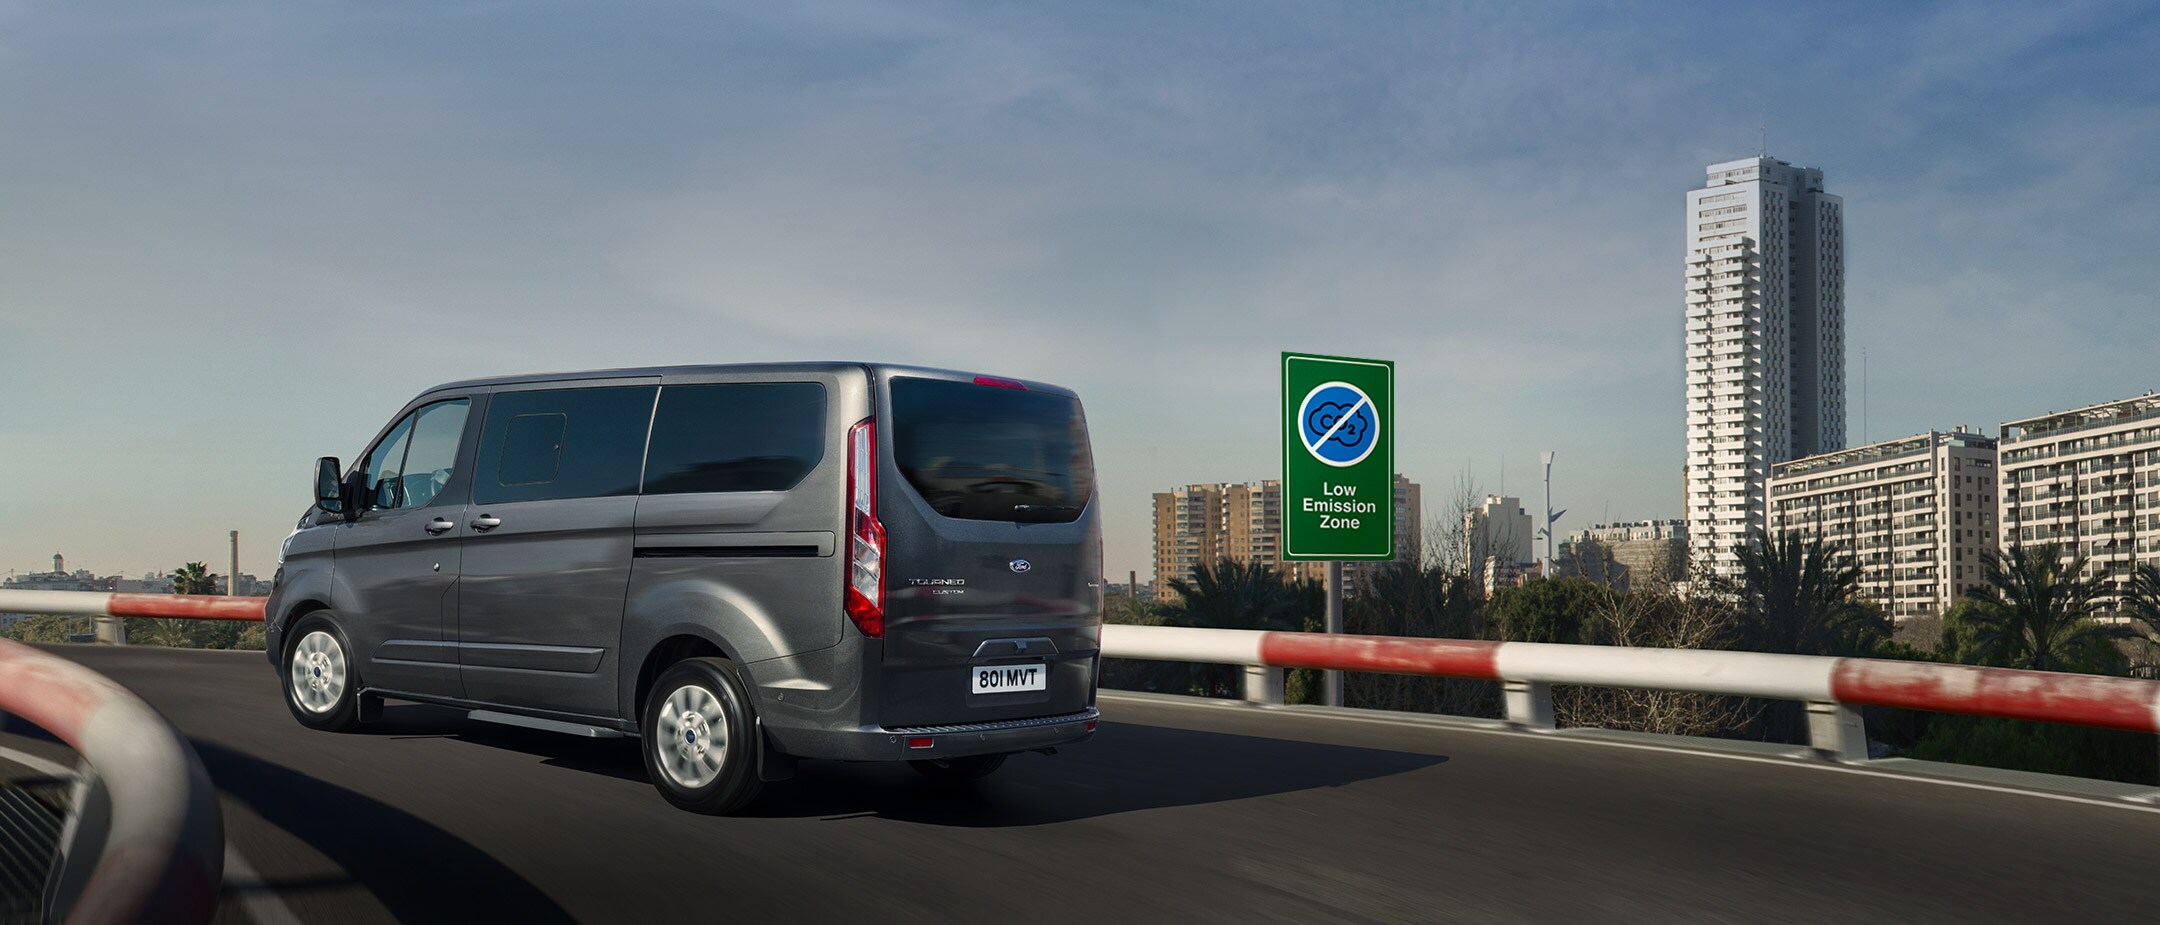 Ford Tourneo Custom driving through low emission zone